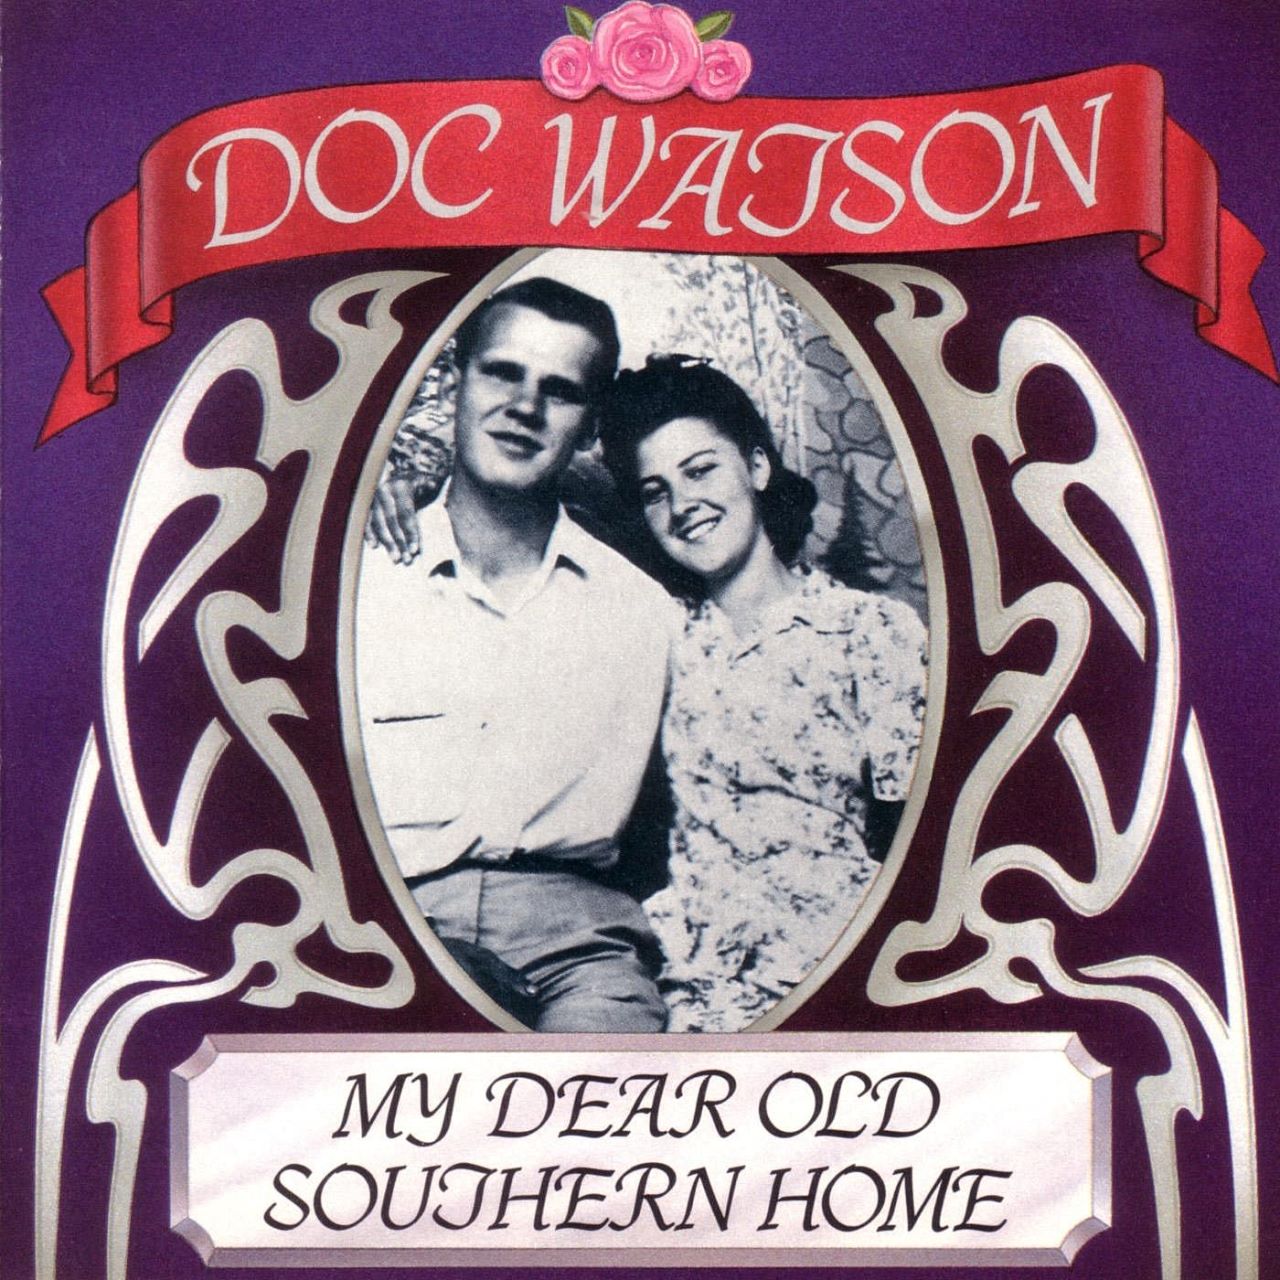 Doc Watson – My Dear Old Southern Home cover album